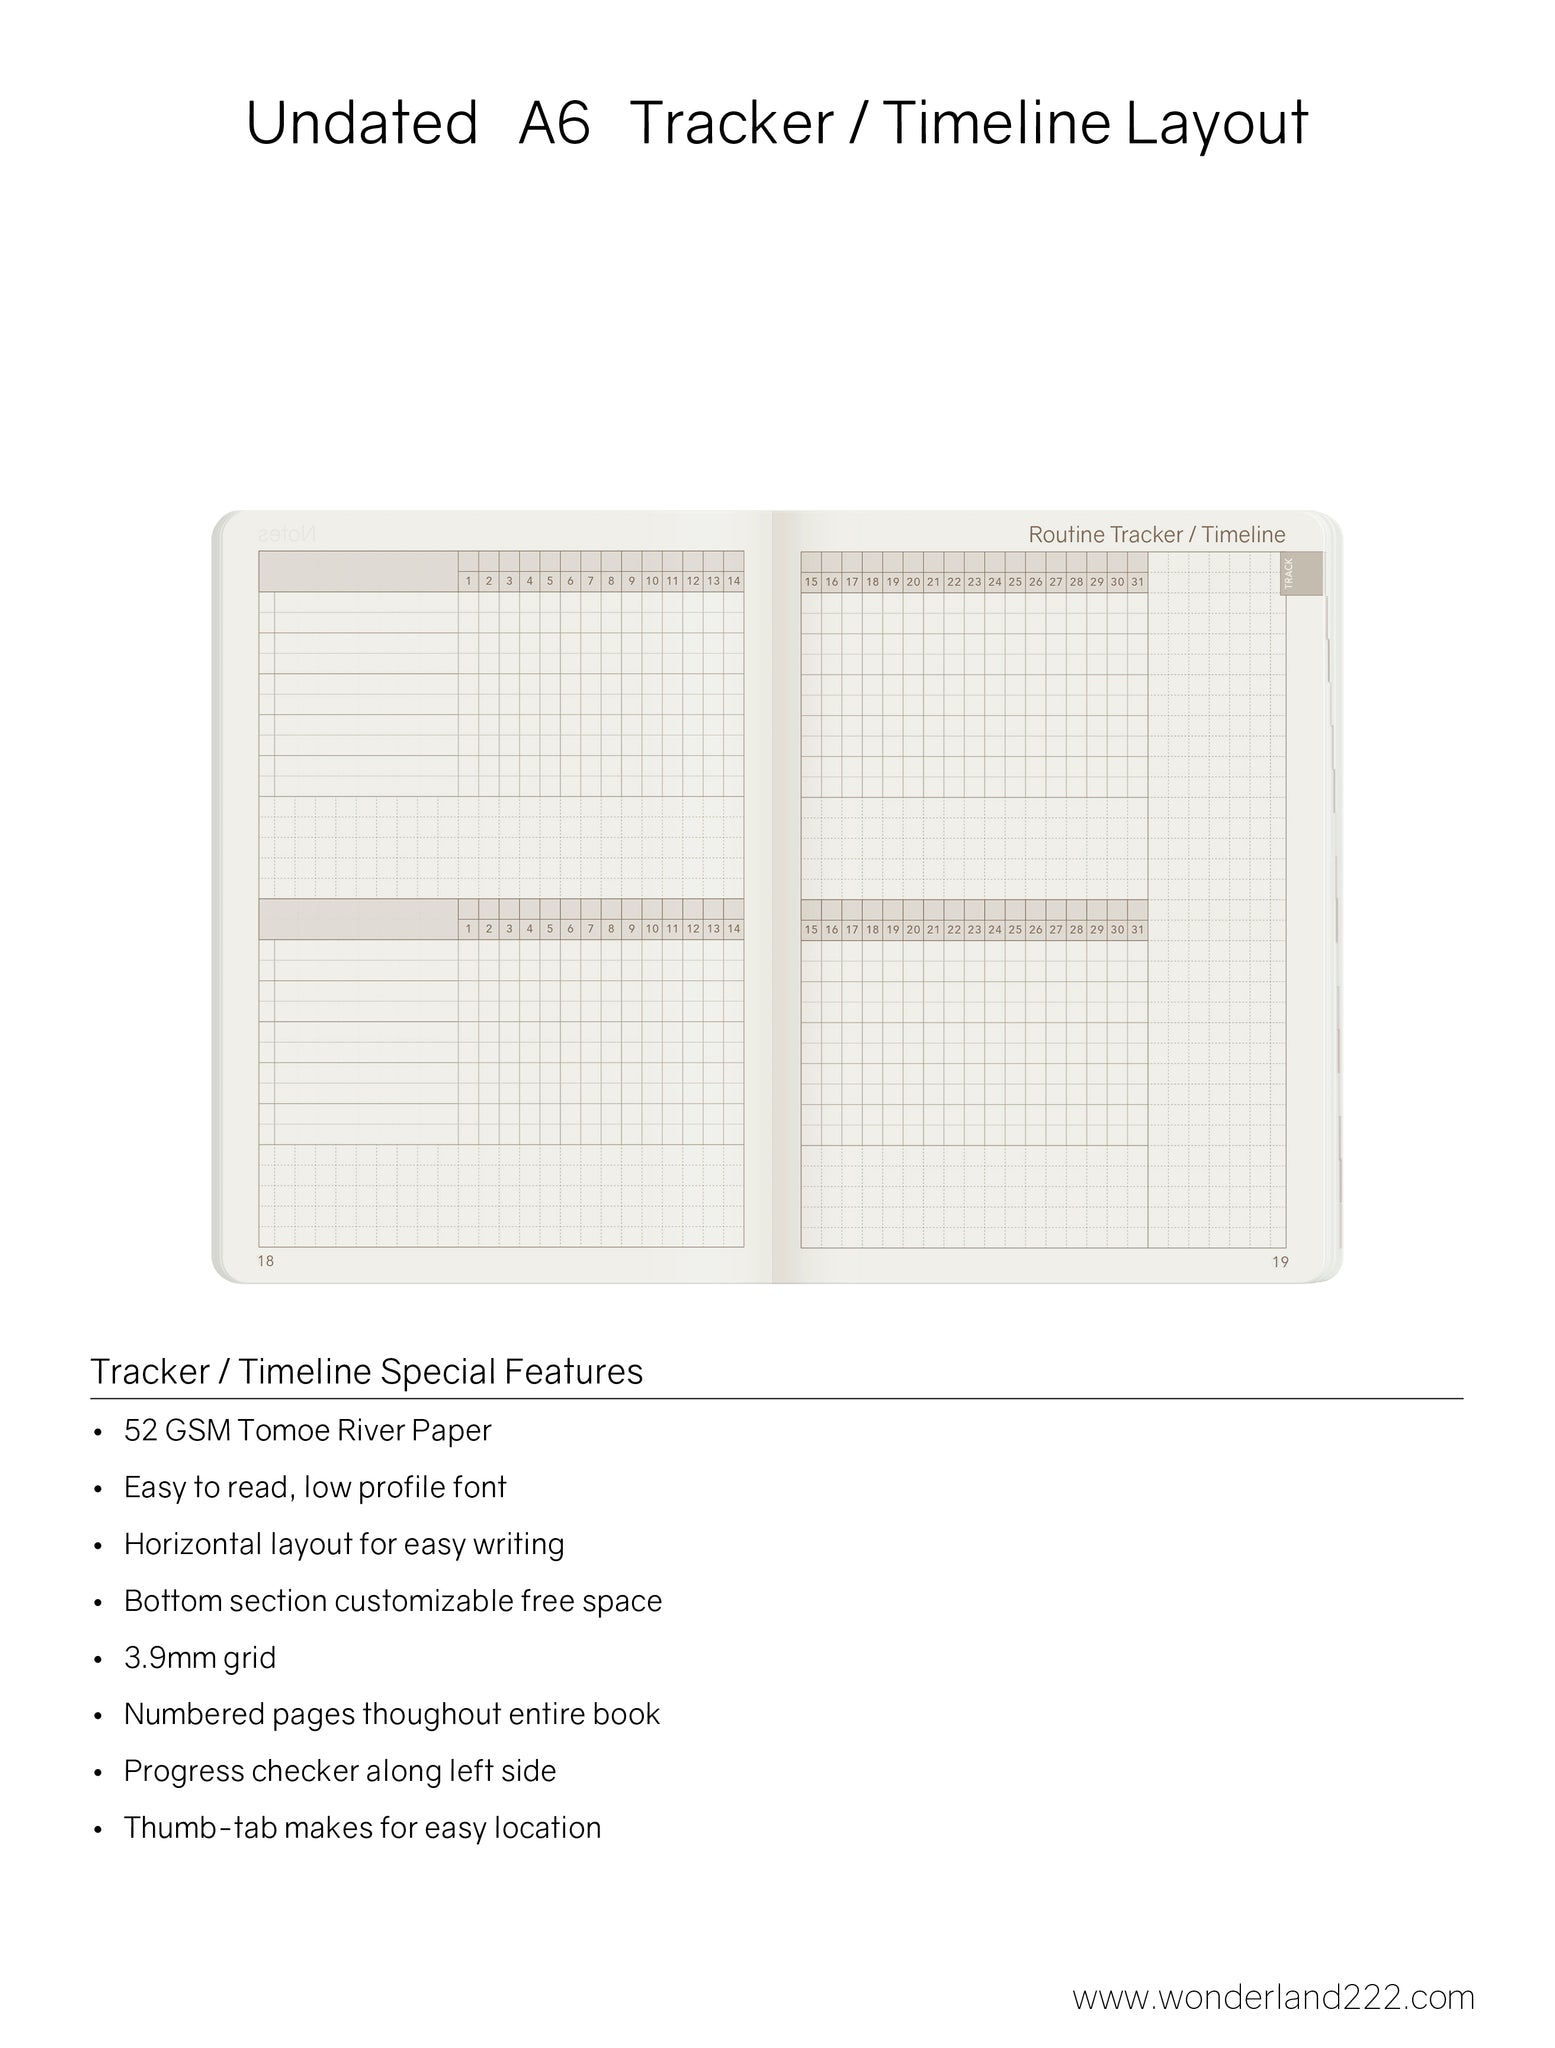 A6 Undated Weekly Planner - 52gsm Tomoe River Paper